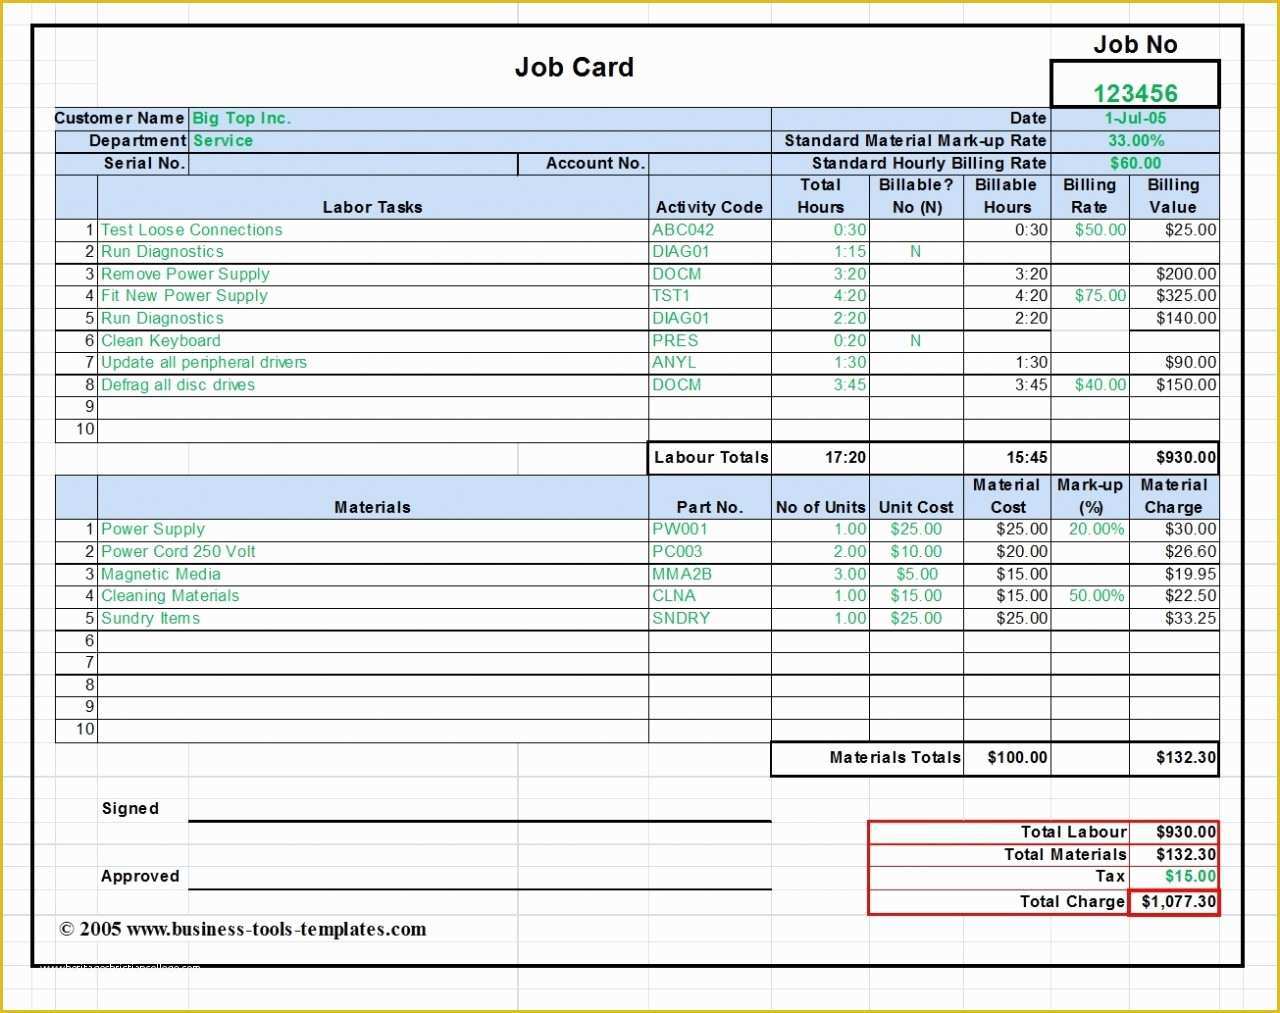 Free Time and Material Template Of Labor and Material Cost Estimator Job Card Template Excel